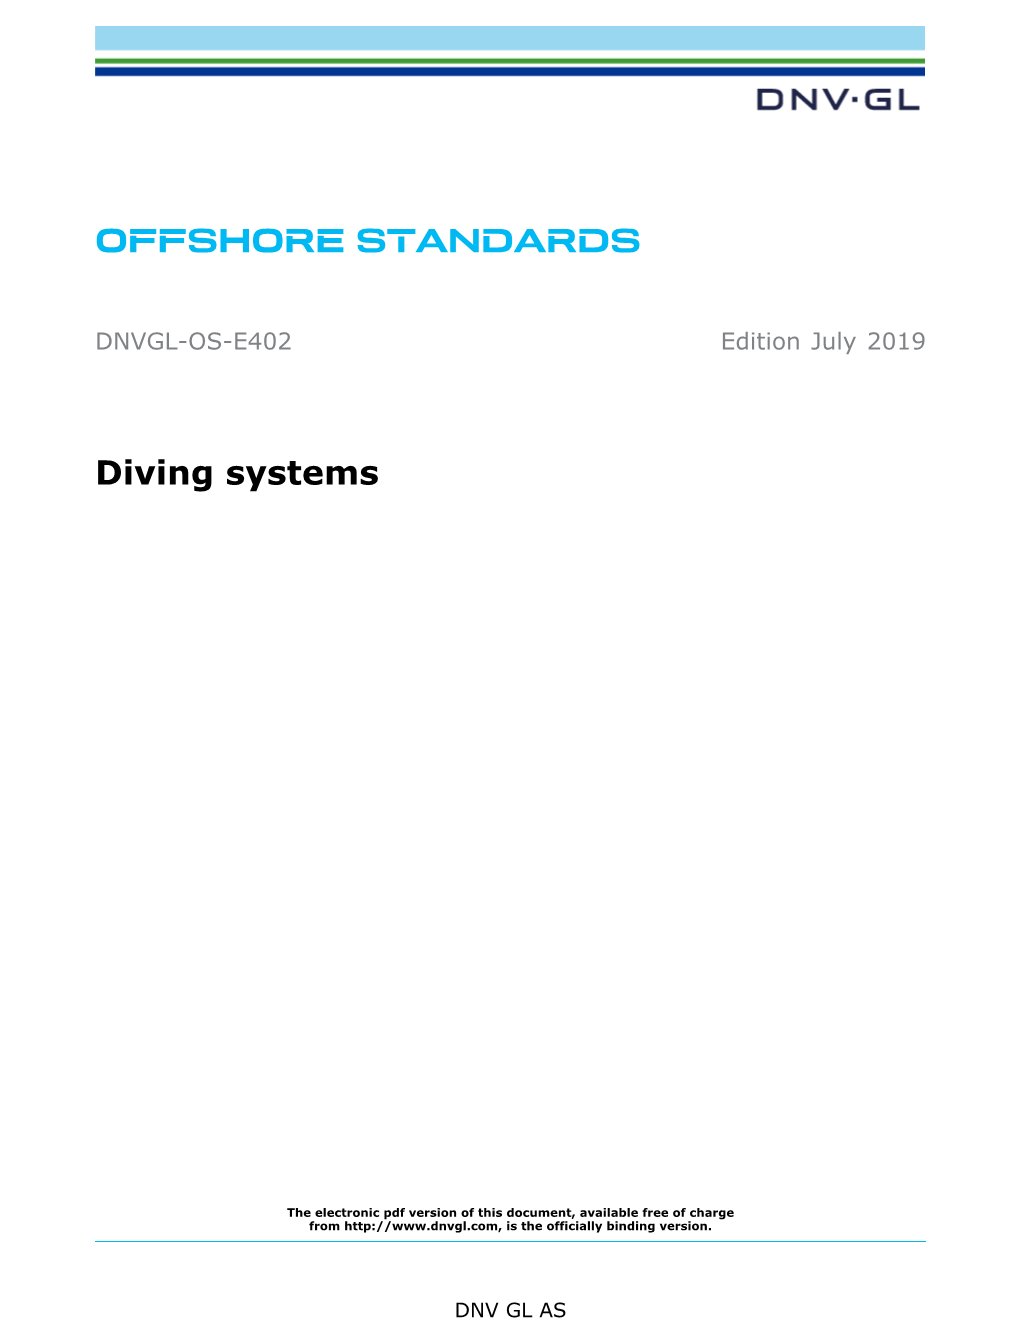 DNVGL-OS-E402 Diving Systems